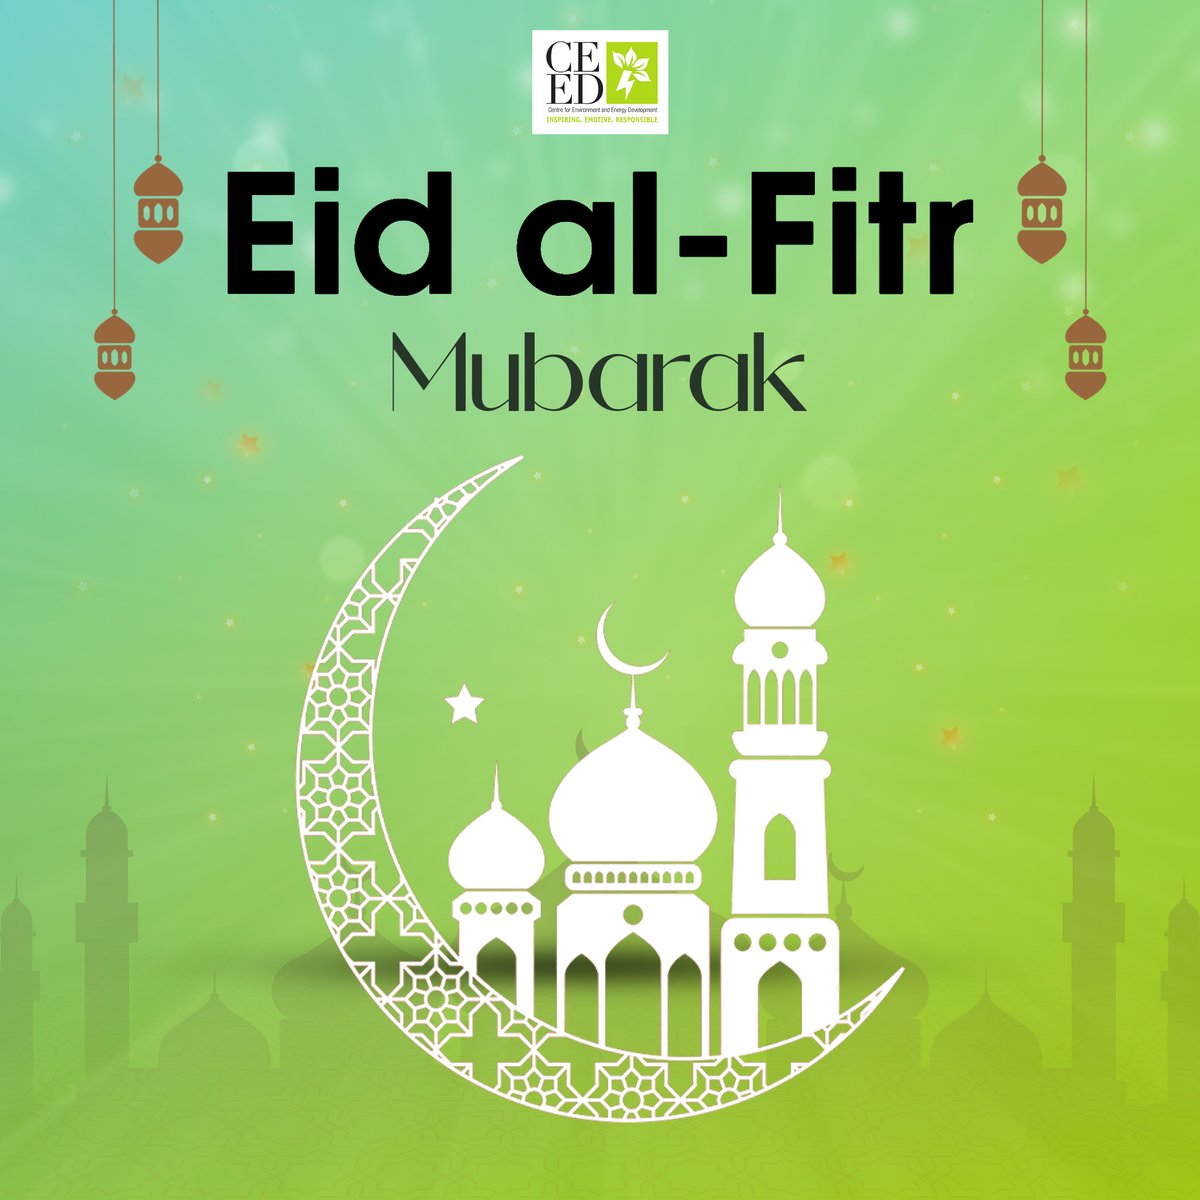 Amidst the joyous melodies and vibrant celebrations, we extend our warm wishes for a truly blessed #EidAlFitr2024. May this auspicious occasion fill your hearts with harmony, your homes with happiness, and your lives with prosperity. #EidMubarak from all of us at #CEED!